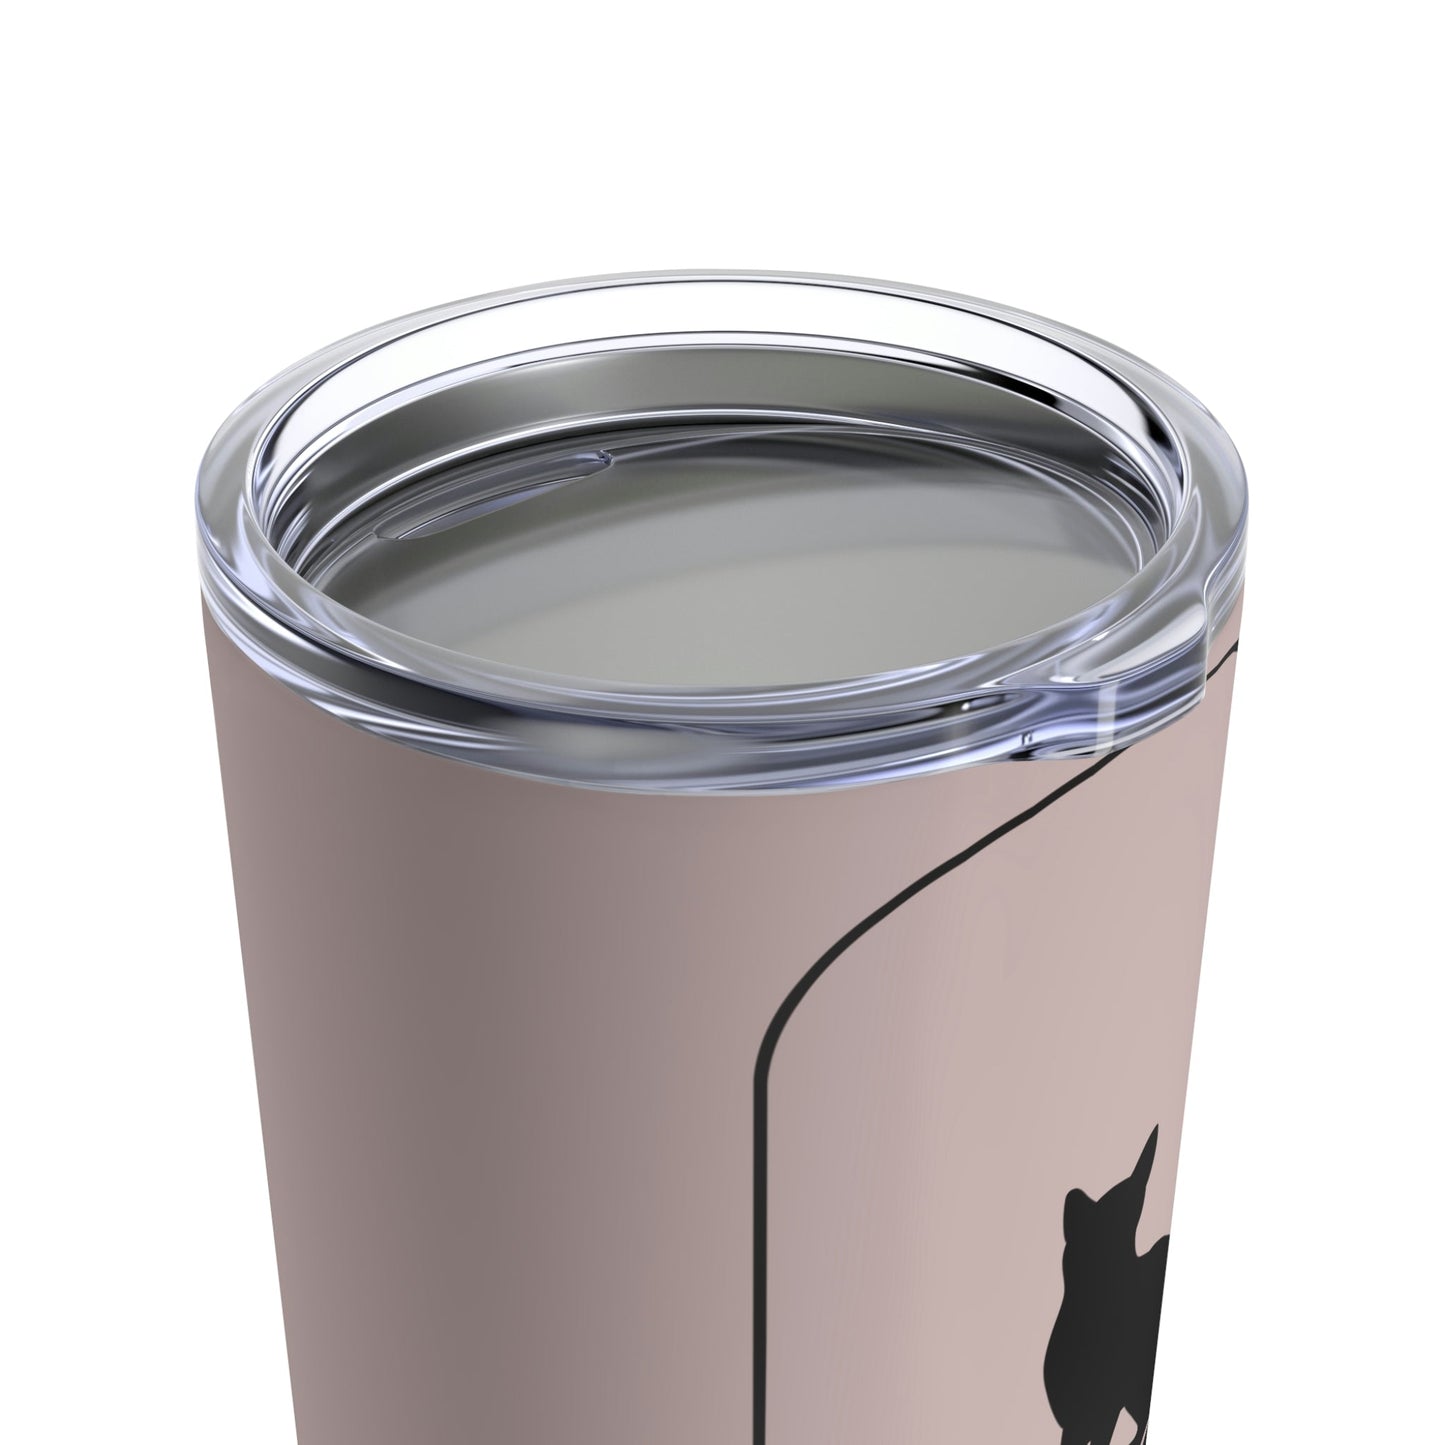 Romeow and Mewliet. William Shakespeare Romeo And Juliet Black Cat Beige Stainless Steel Hot or Cold Vacuum Tumbler 20oz Ichaku [Perfect Gifts Selection]